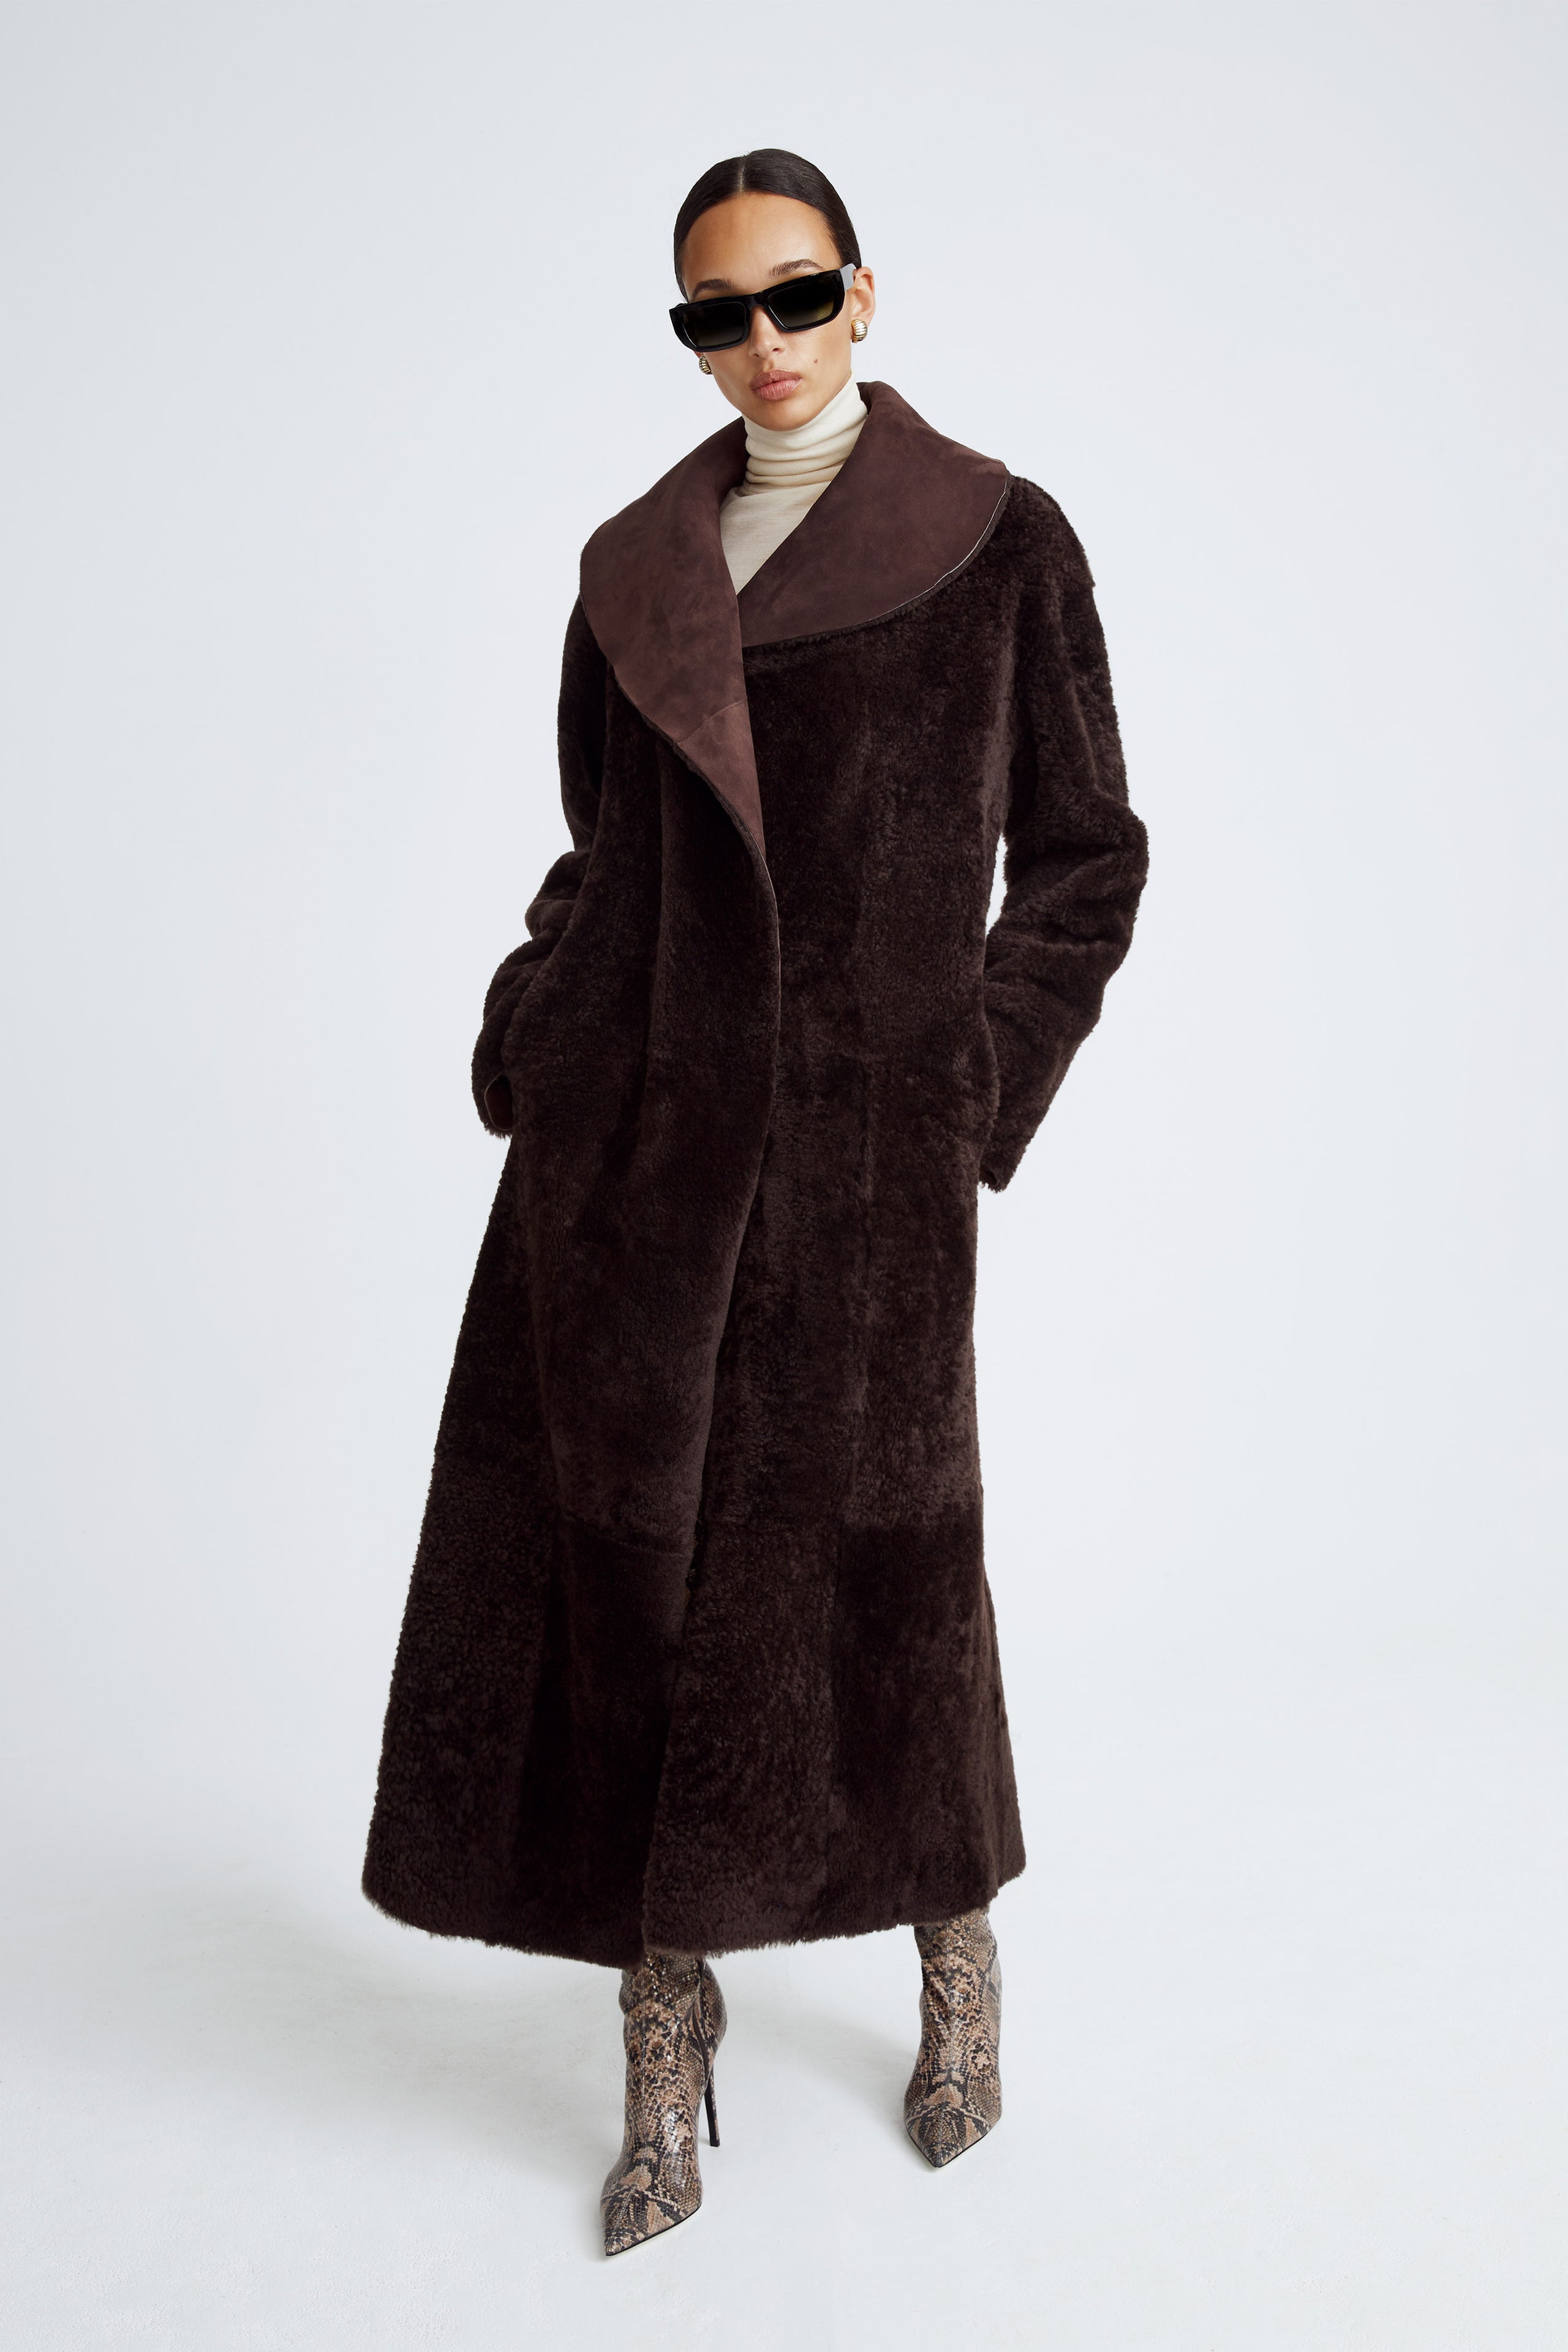 Model is wearing the Agnes Dark Chocolate Reversible Shearling Coat Front